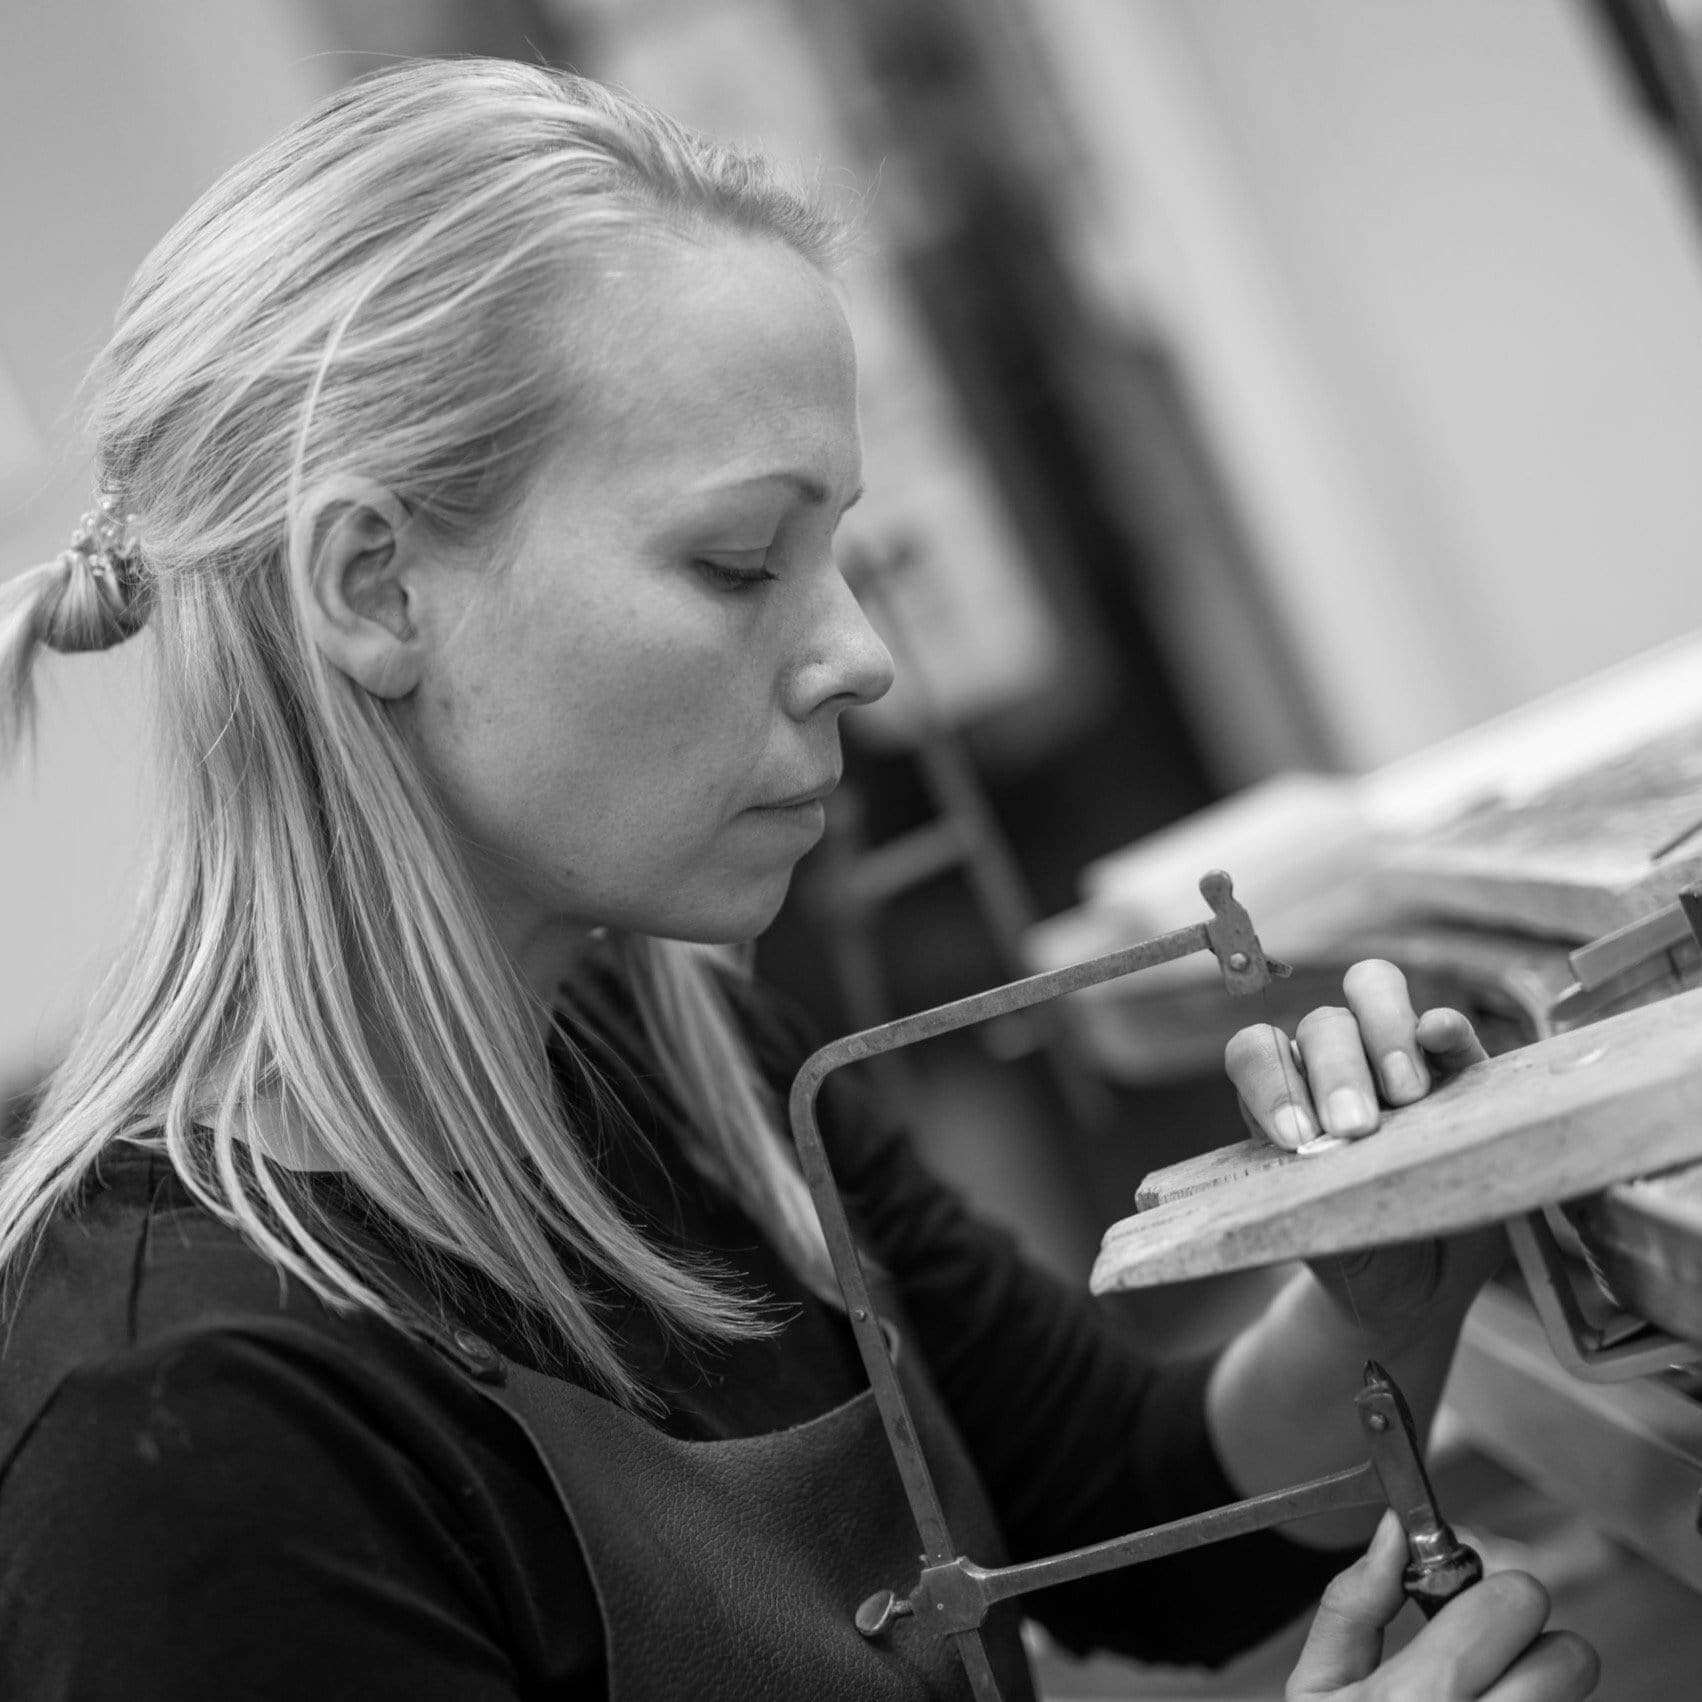 Fjord jewellery is being cut out by hand at Otteren Gullsmed & Urmaker